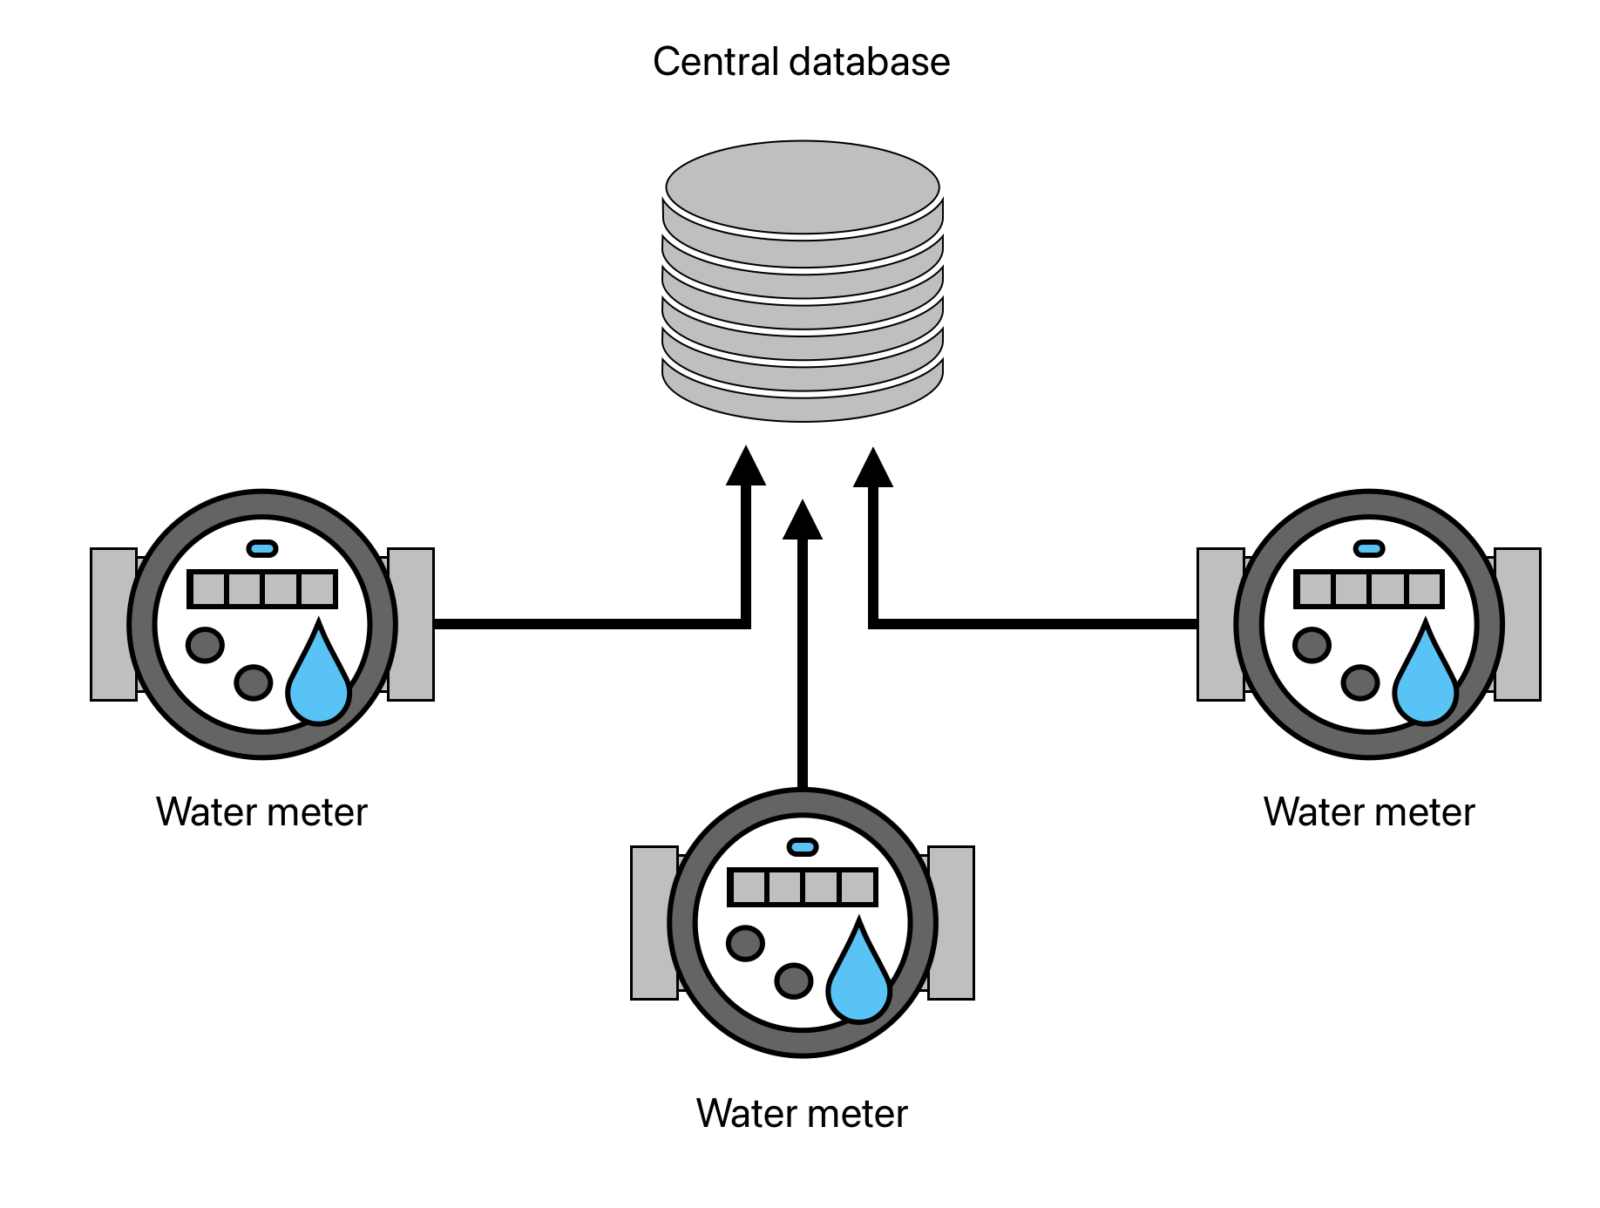 Illustration of remote reading device connecting to a central database